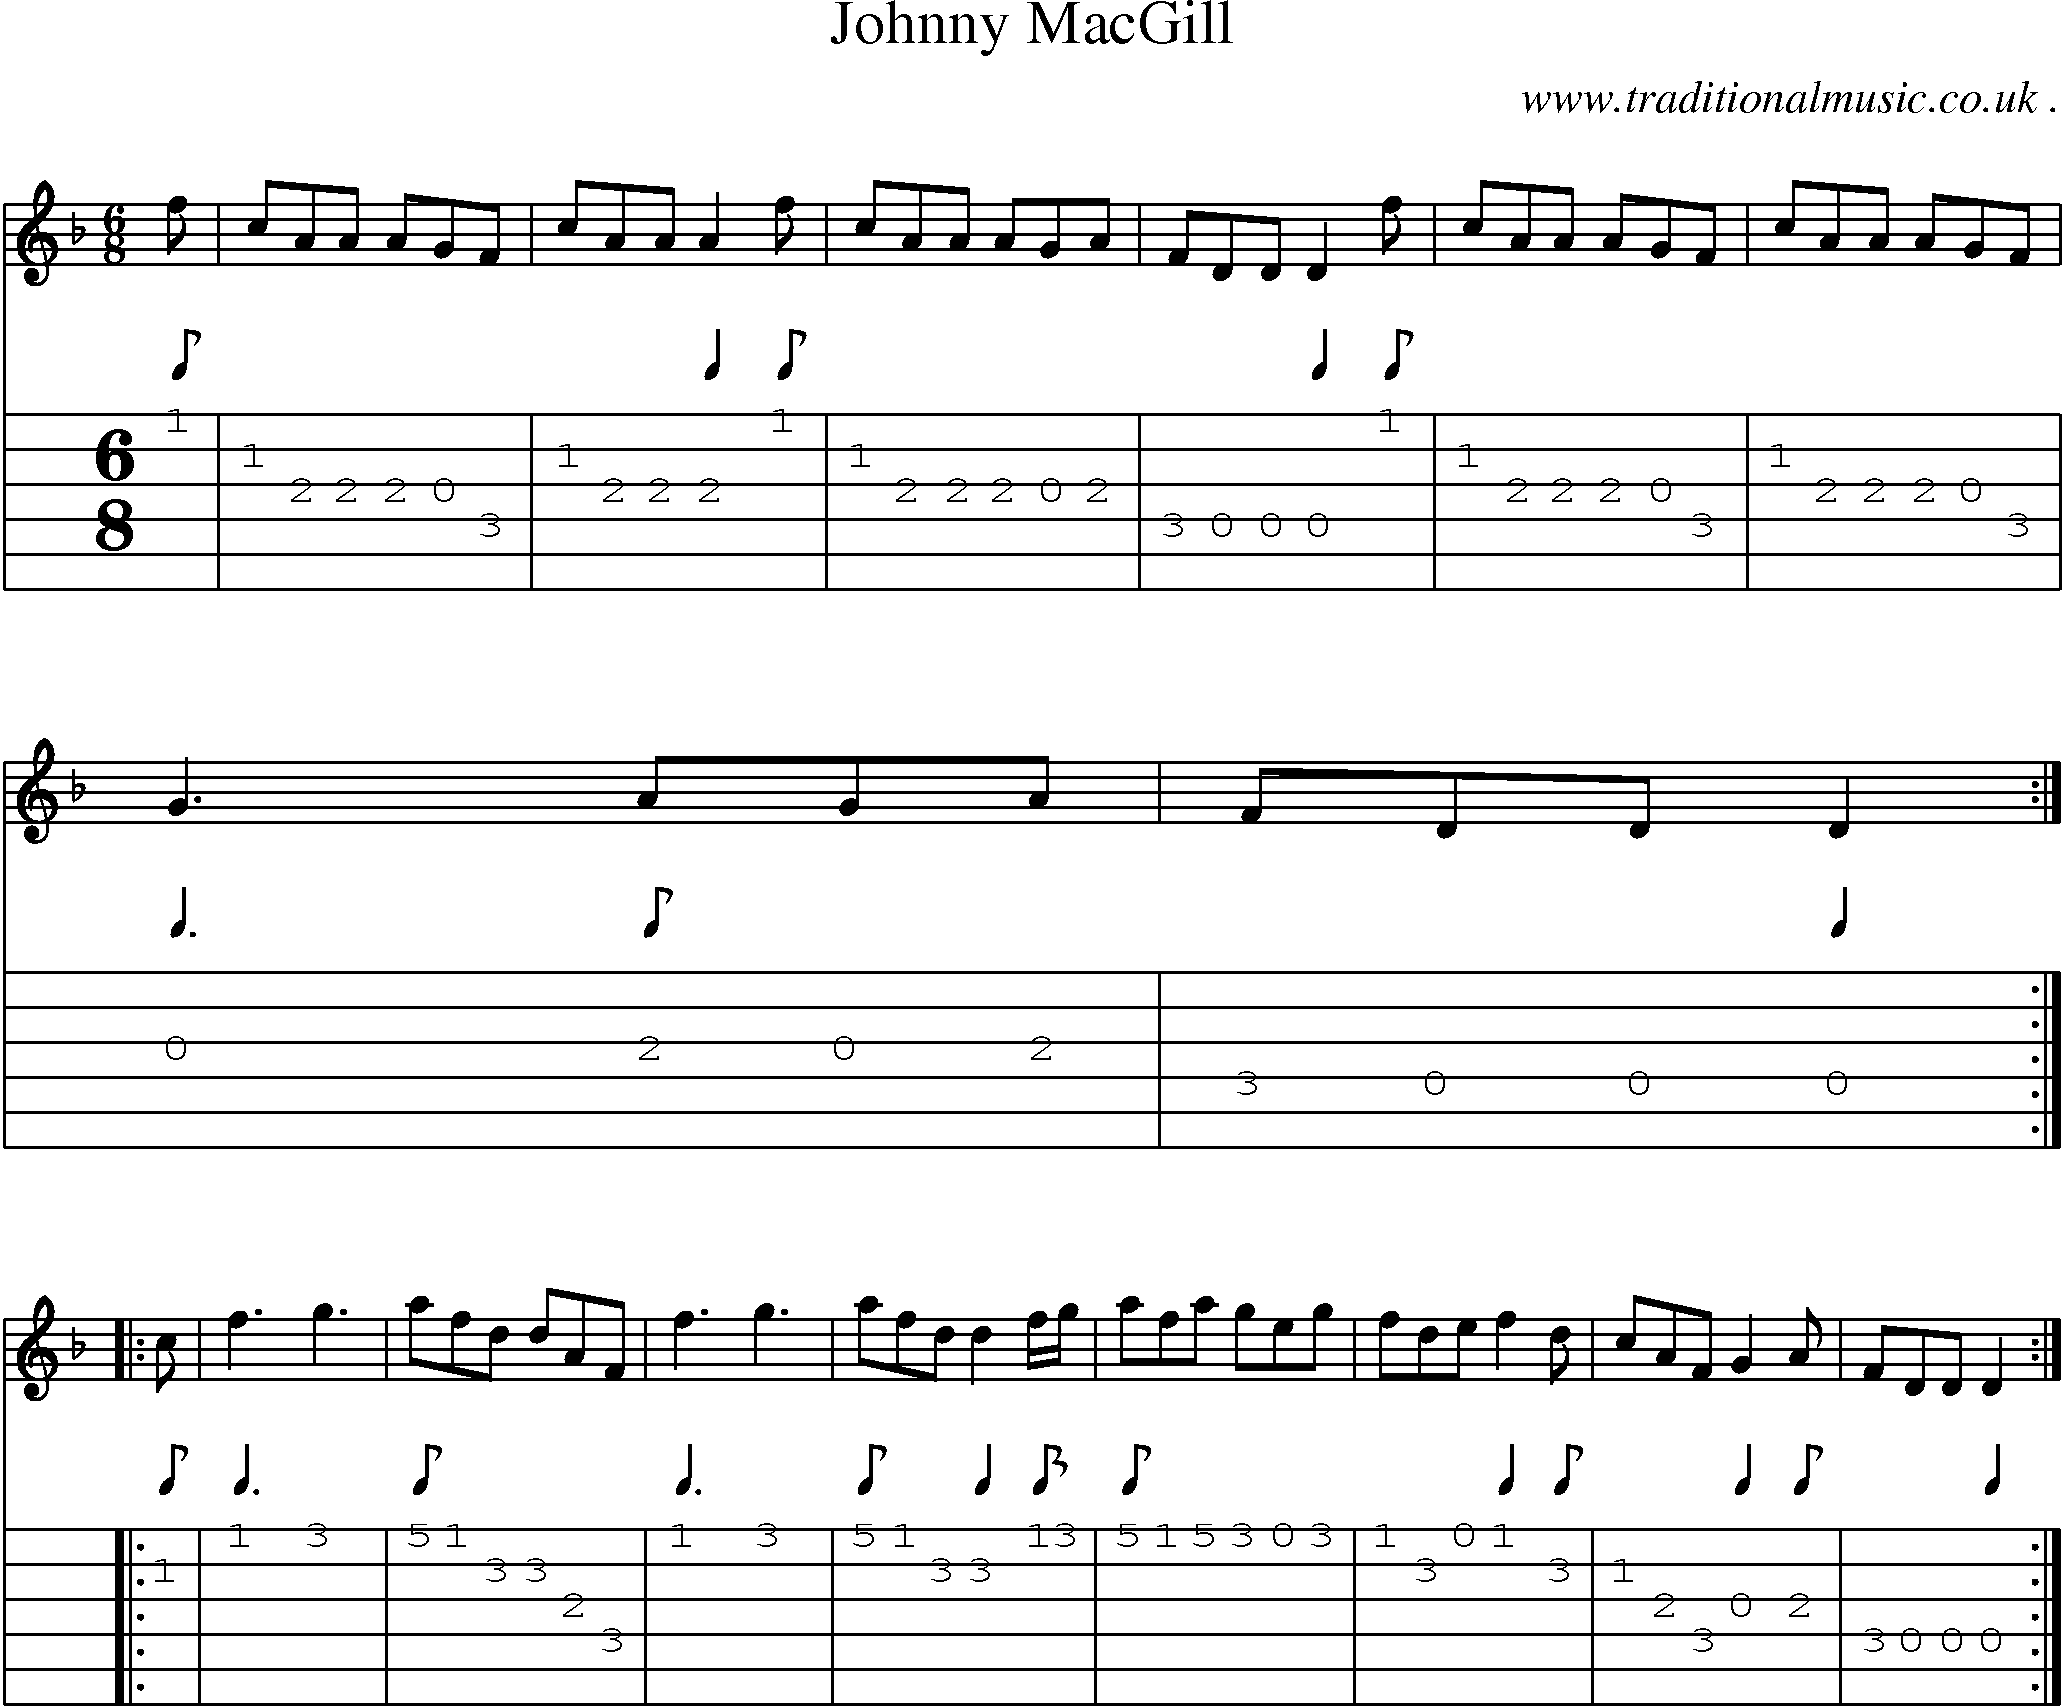 Sheet-music  score, Chords and Guitar Tabs for Johnny Macgill